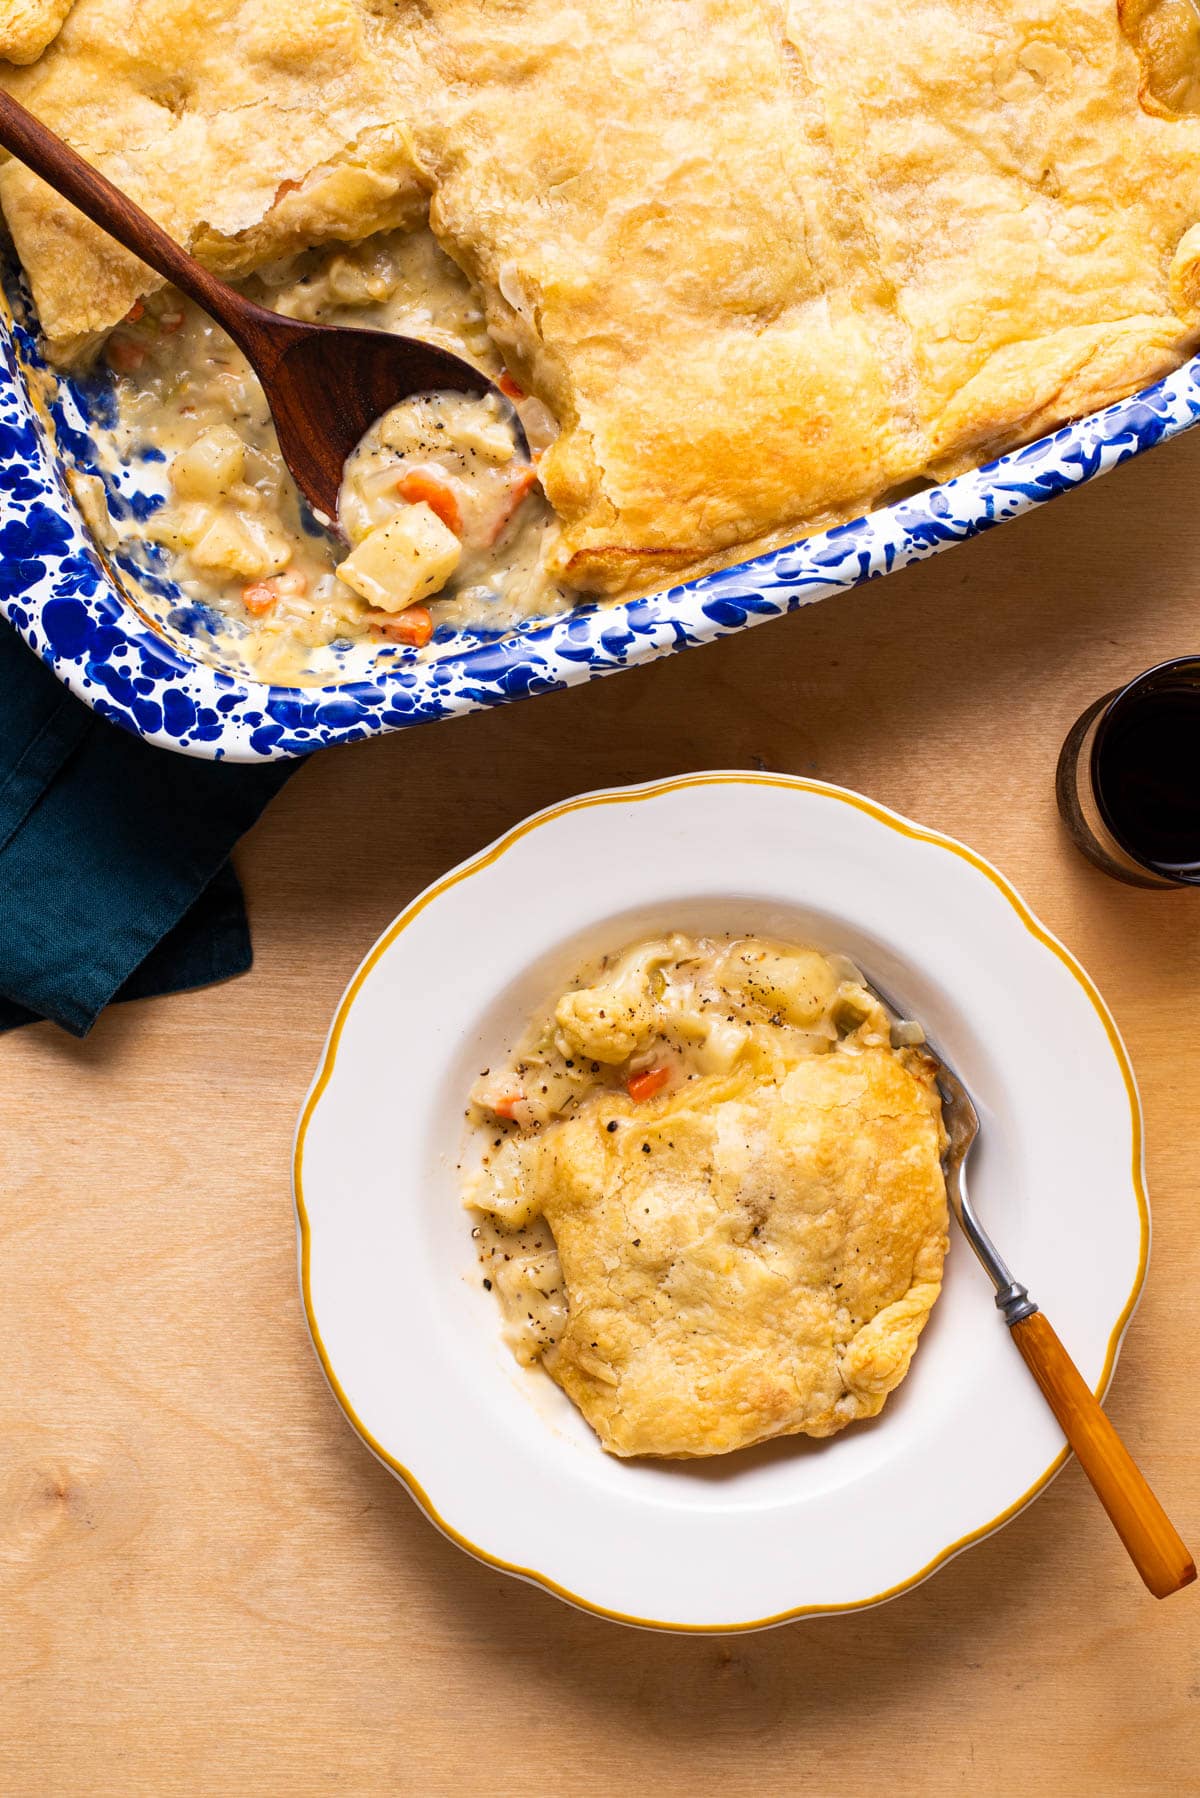 Vegan cauliflower pot pie with a puff pastry topping served in a vintage scalloped plate.